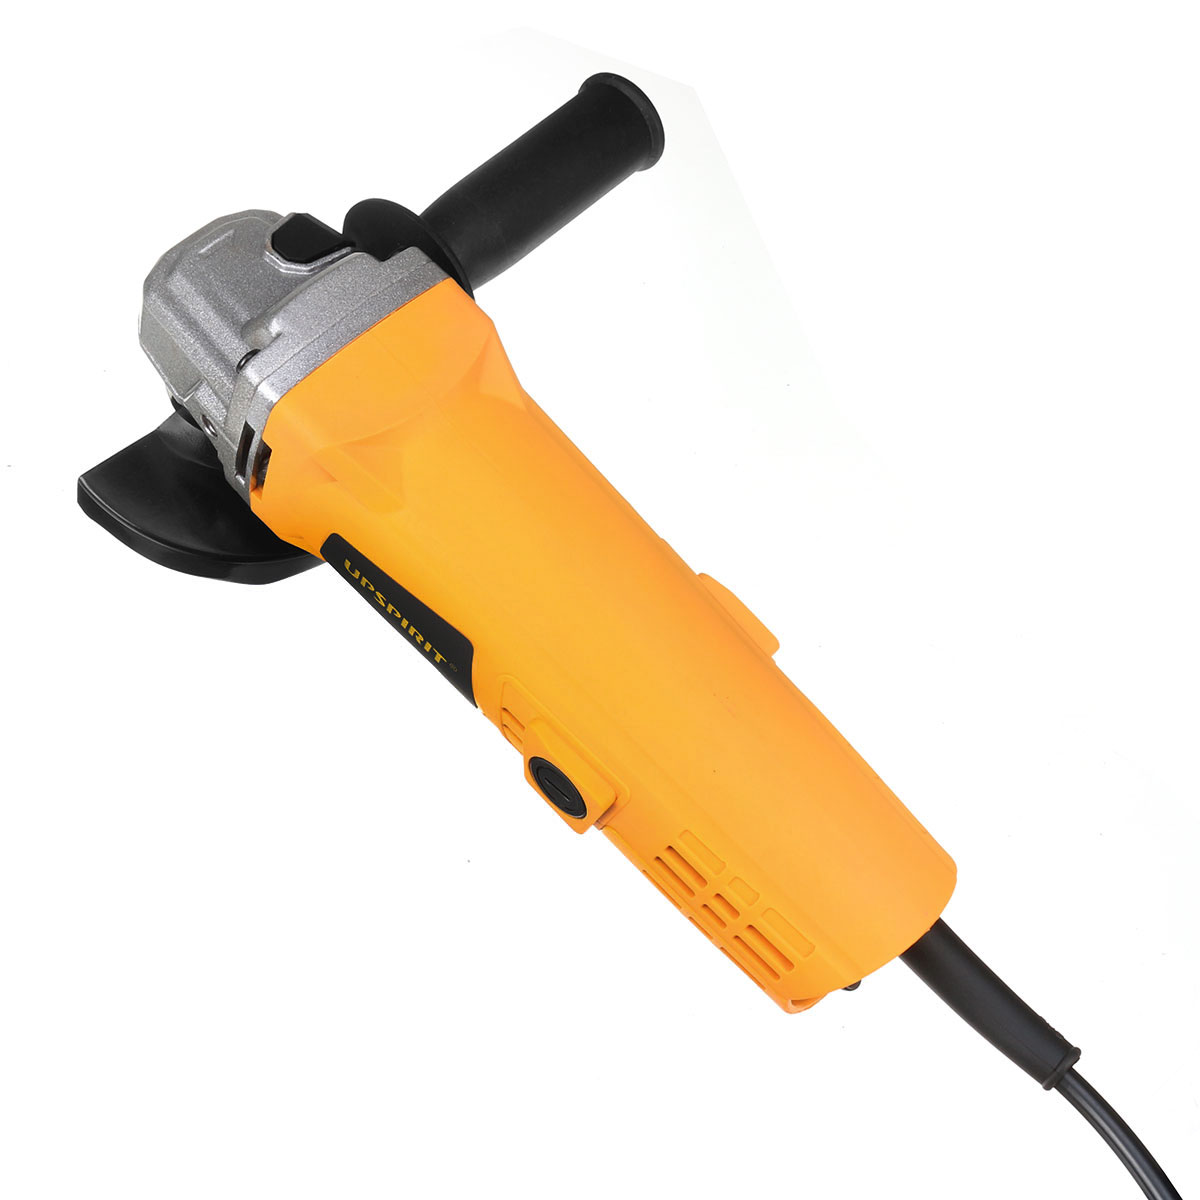 700W-Electric-Angle-Grinder-100mm-Polishing-Polisher-Grinding-Cutting-Tool-10000RPM-1560434